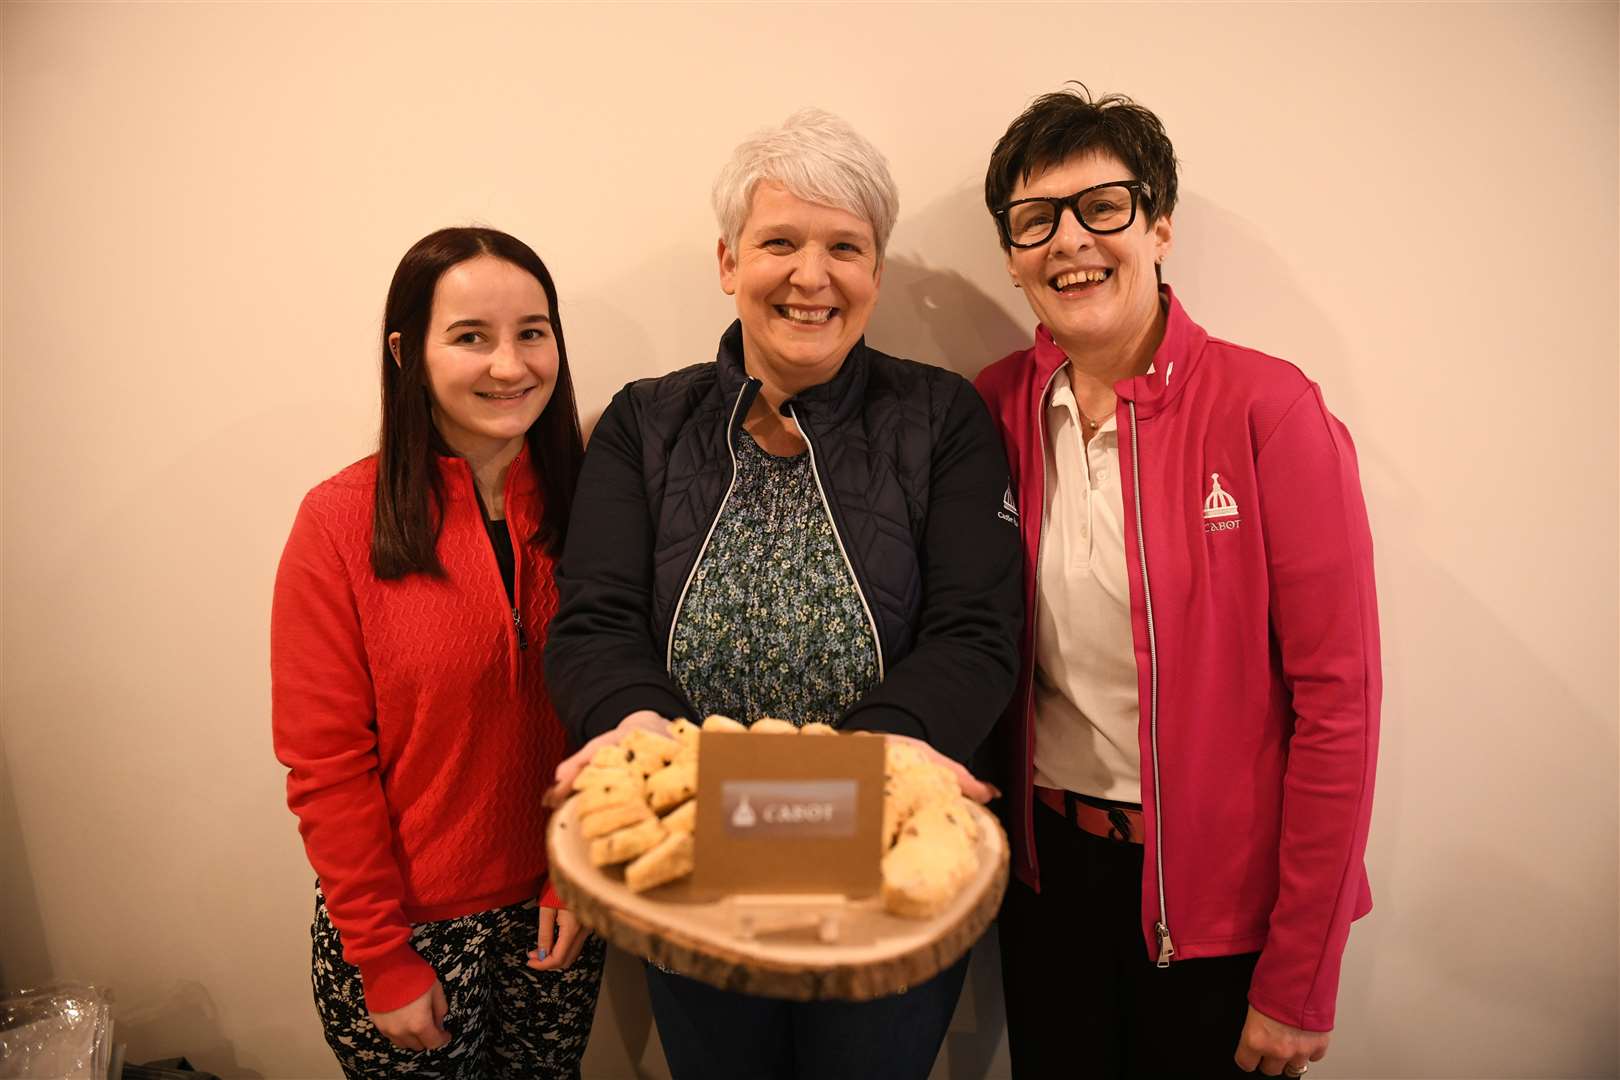 Charlotte Failes, Dianne Marshalls and Elspeth Beardwood from Cabot. Picture: James Mackenzie.